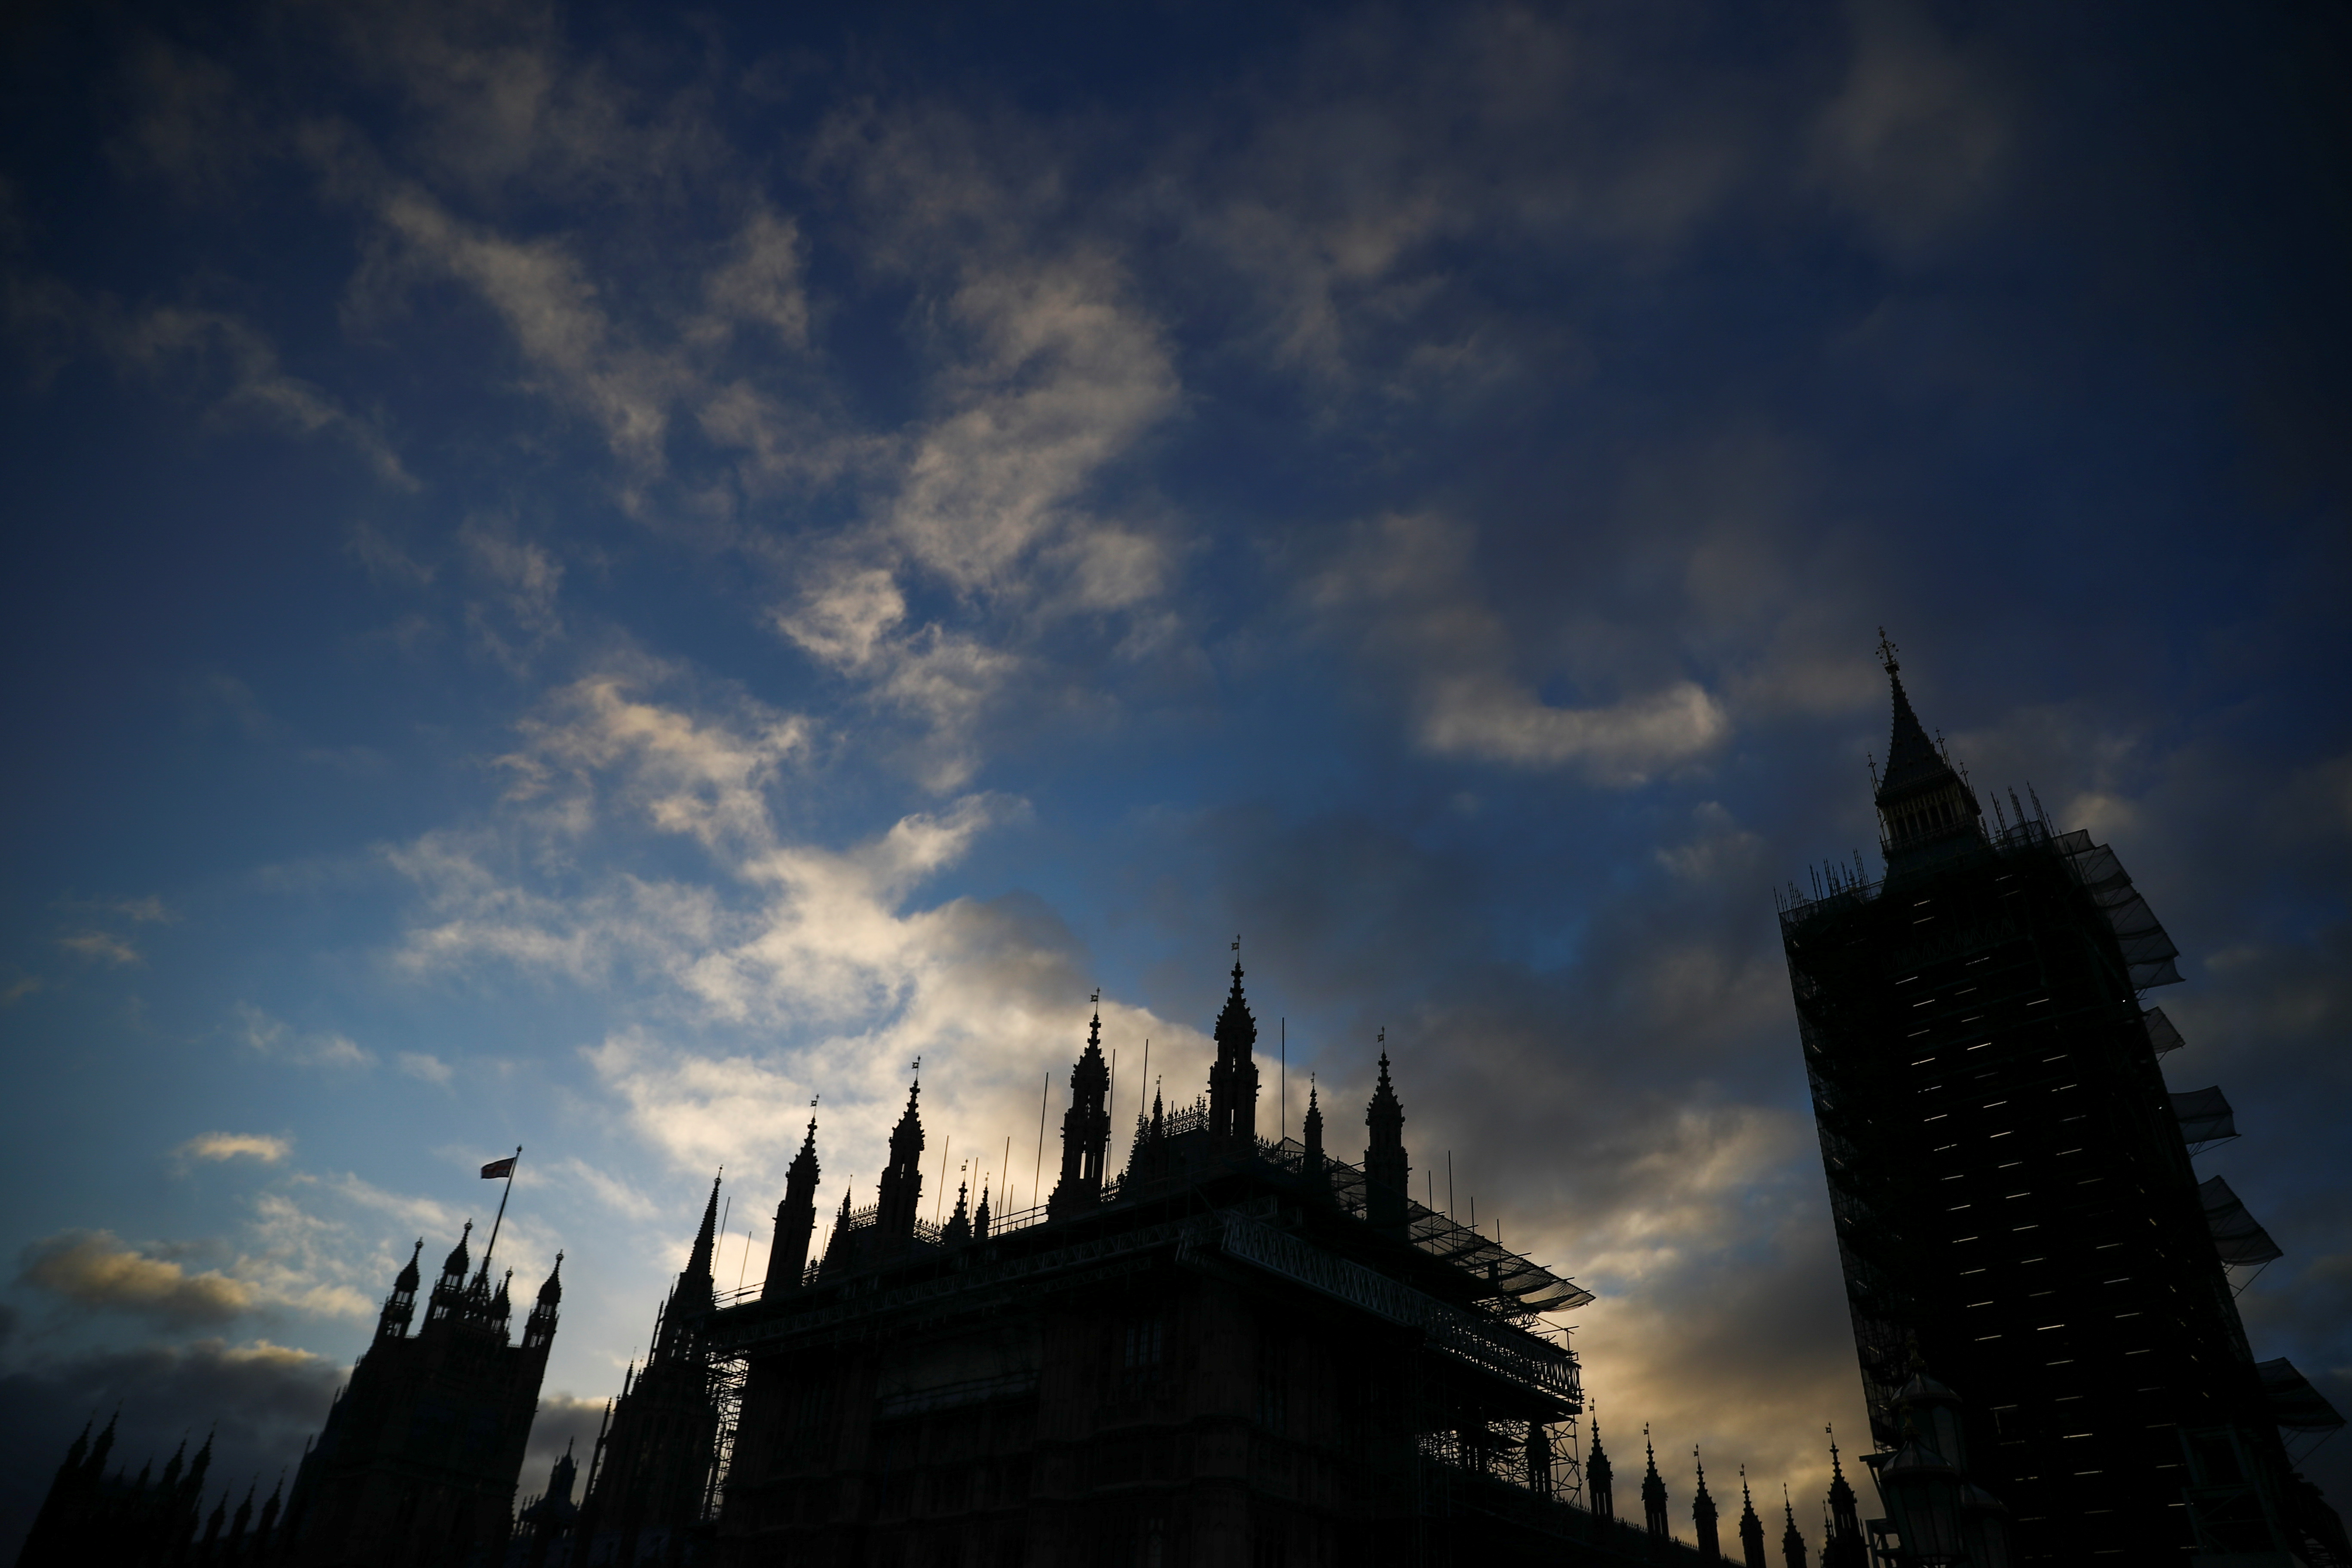 A general view of The Houses of Parliament silhouetted, in London